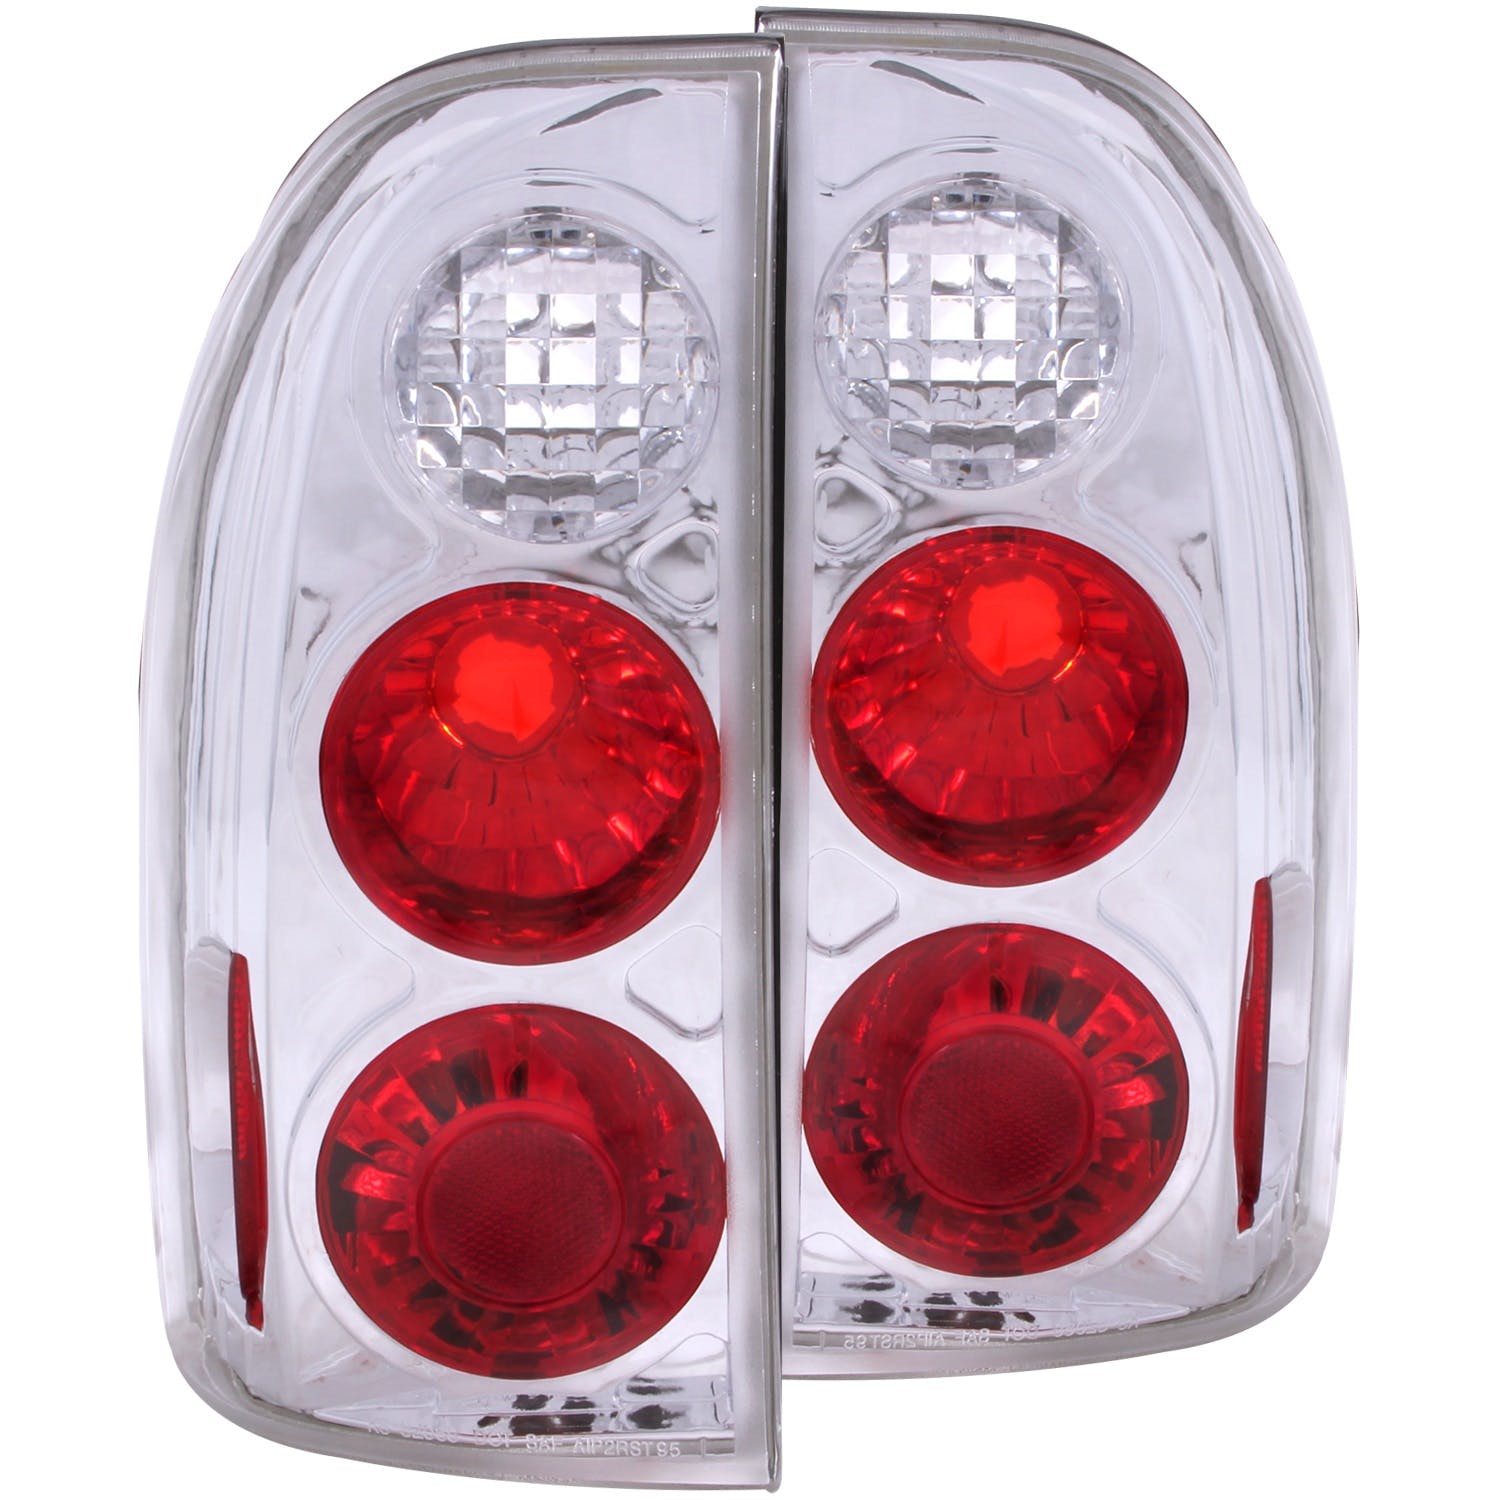 AnzoUSA 211135 Taillights Chrome